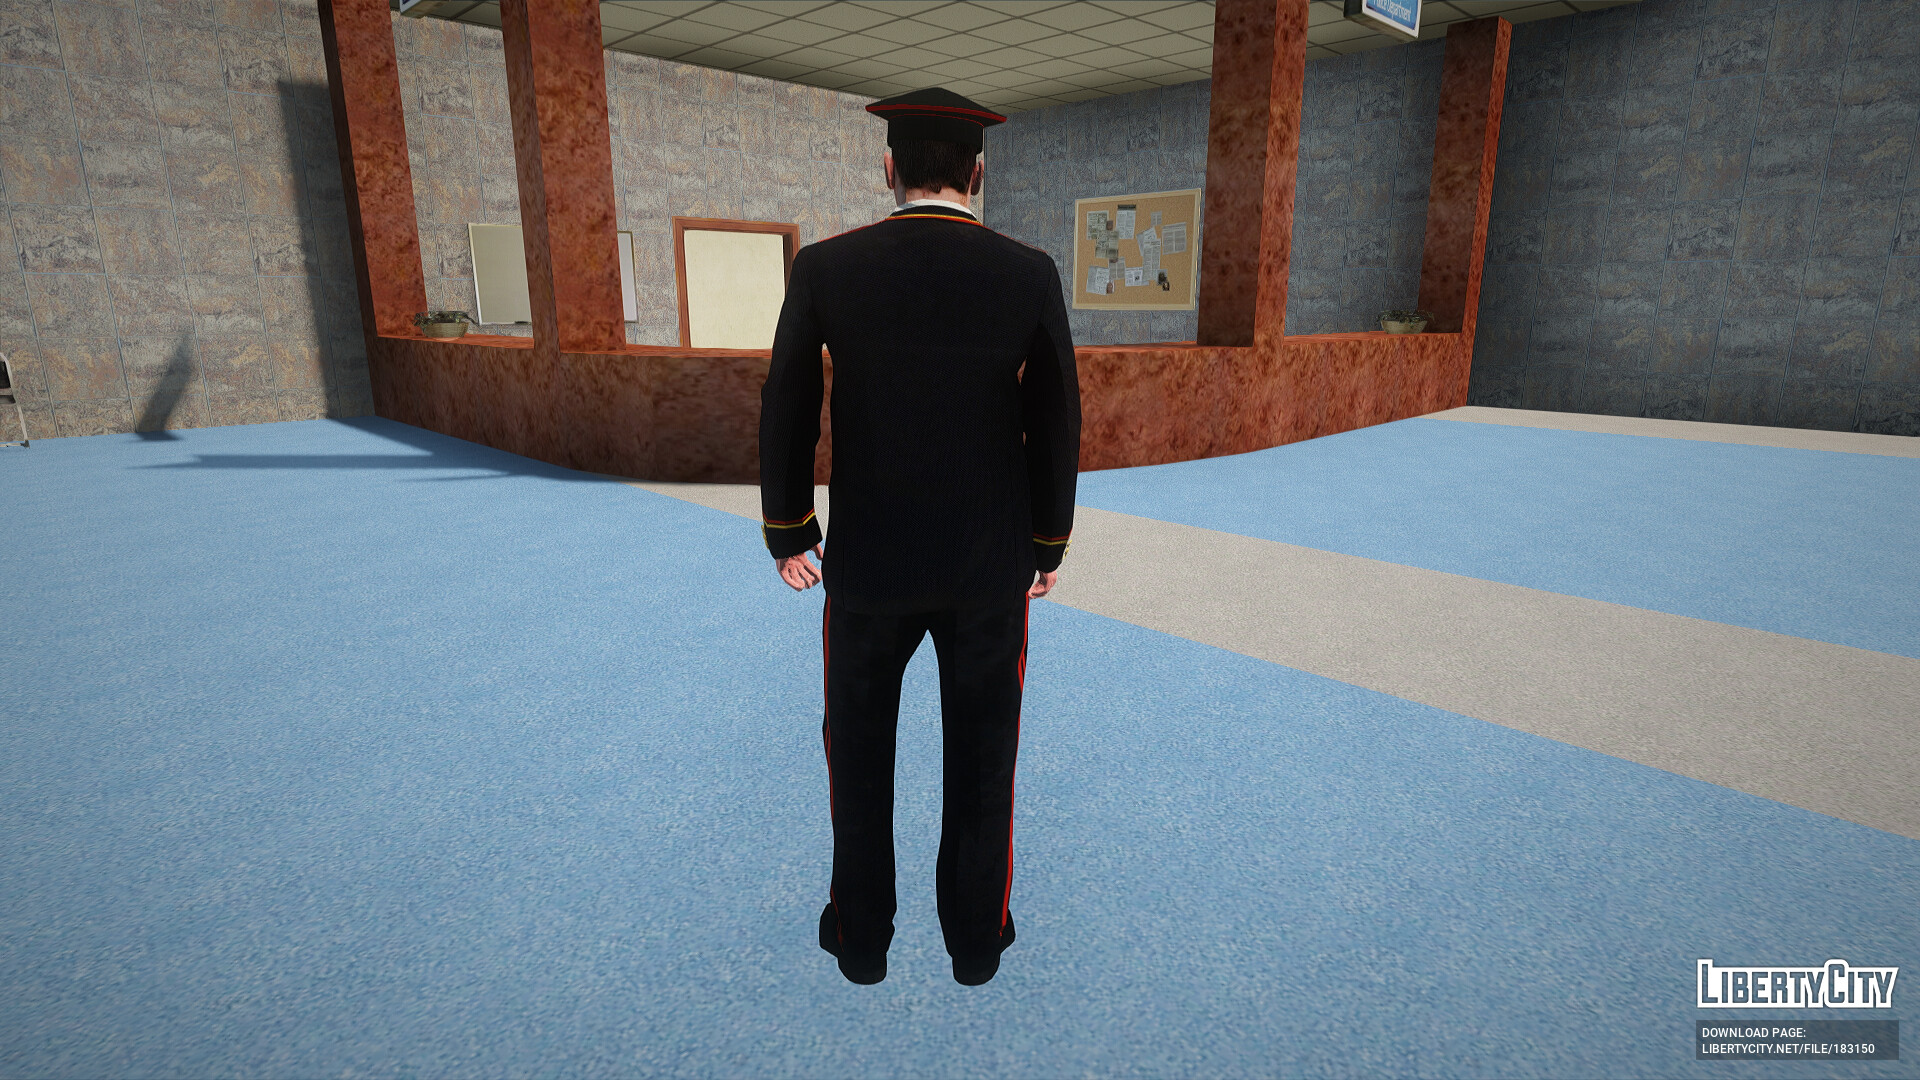 Download Major General of the Ministry of the Interior for GTA San Andreas